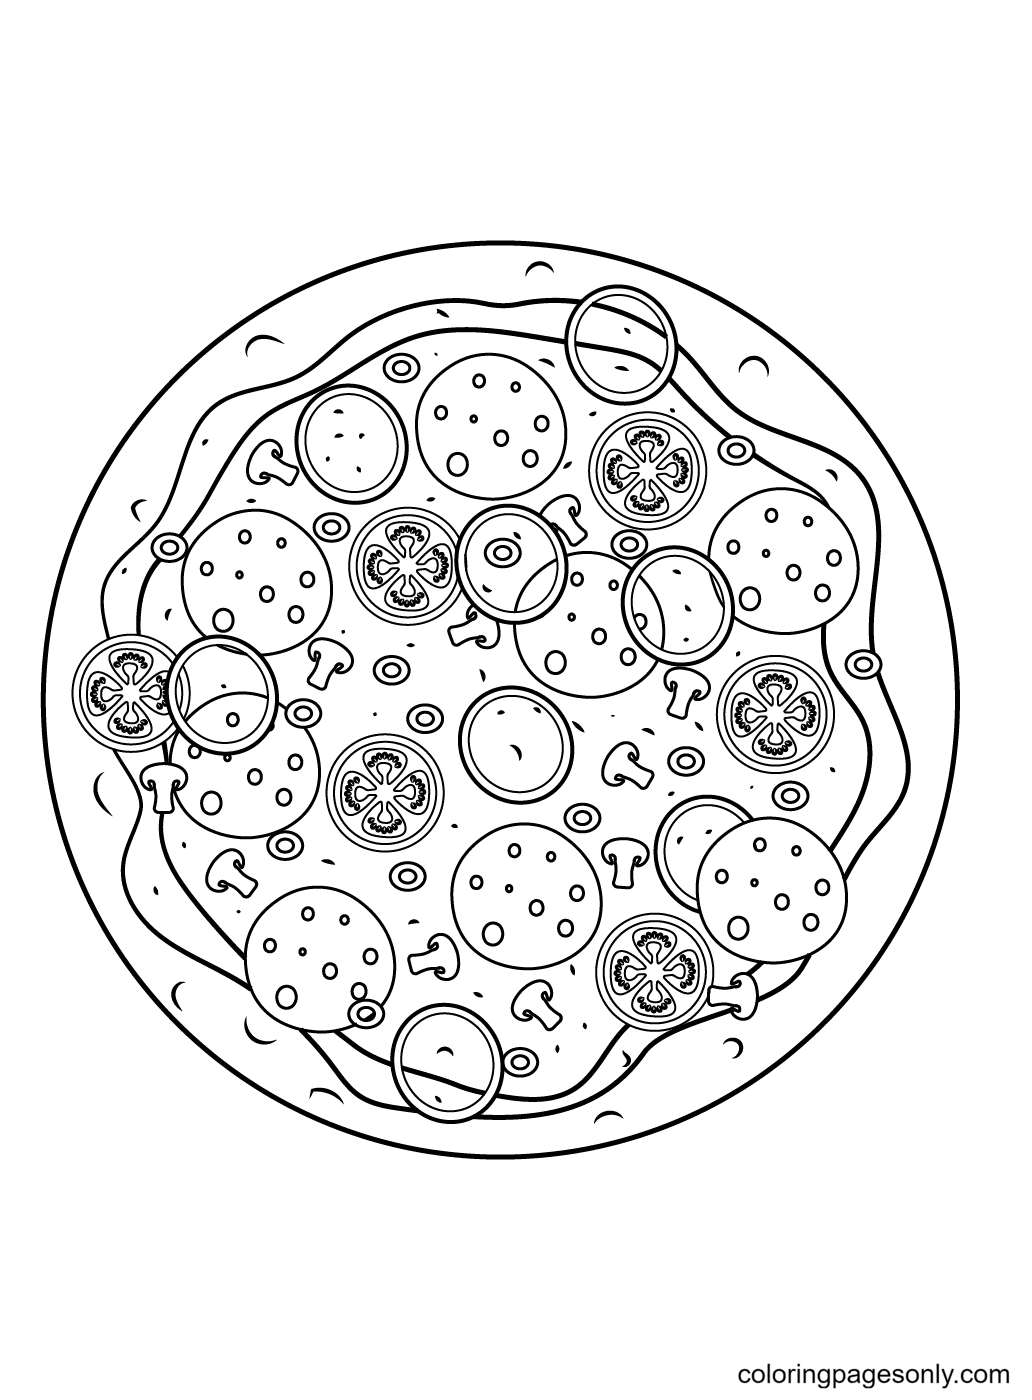 Pizza With Pepperonis, Onions, Tomatoes, Mushrooms, And Olives Coloring Pages